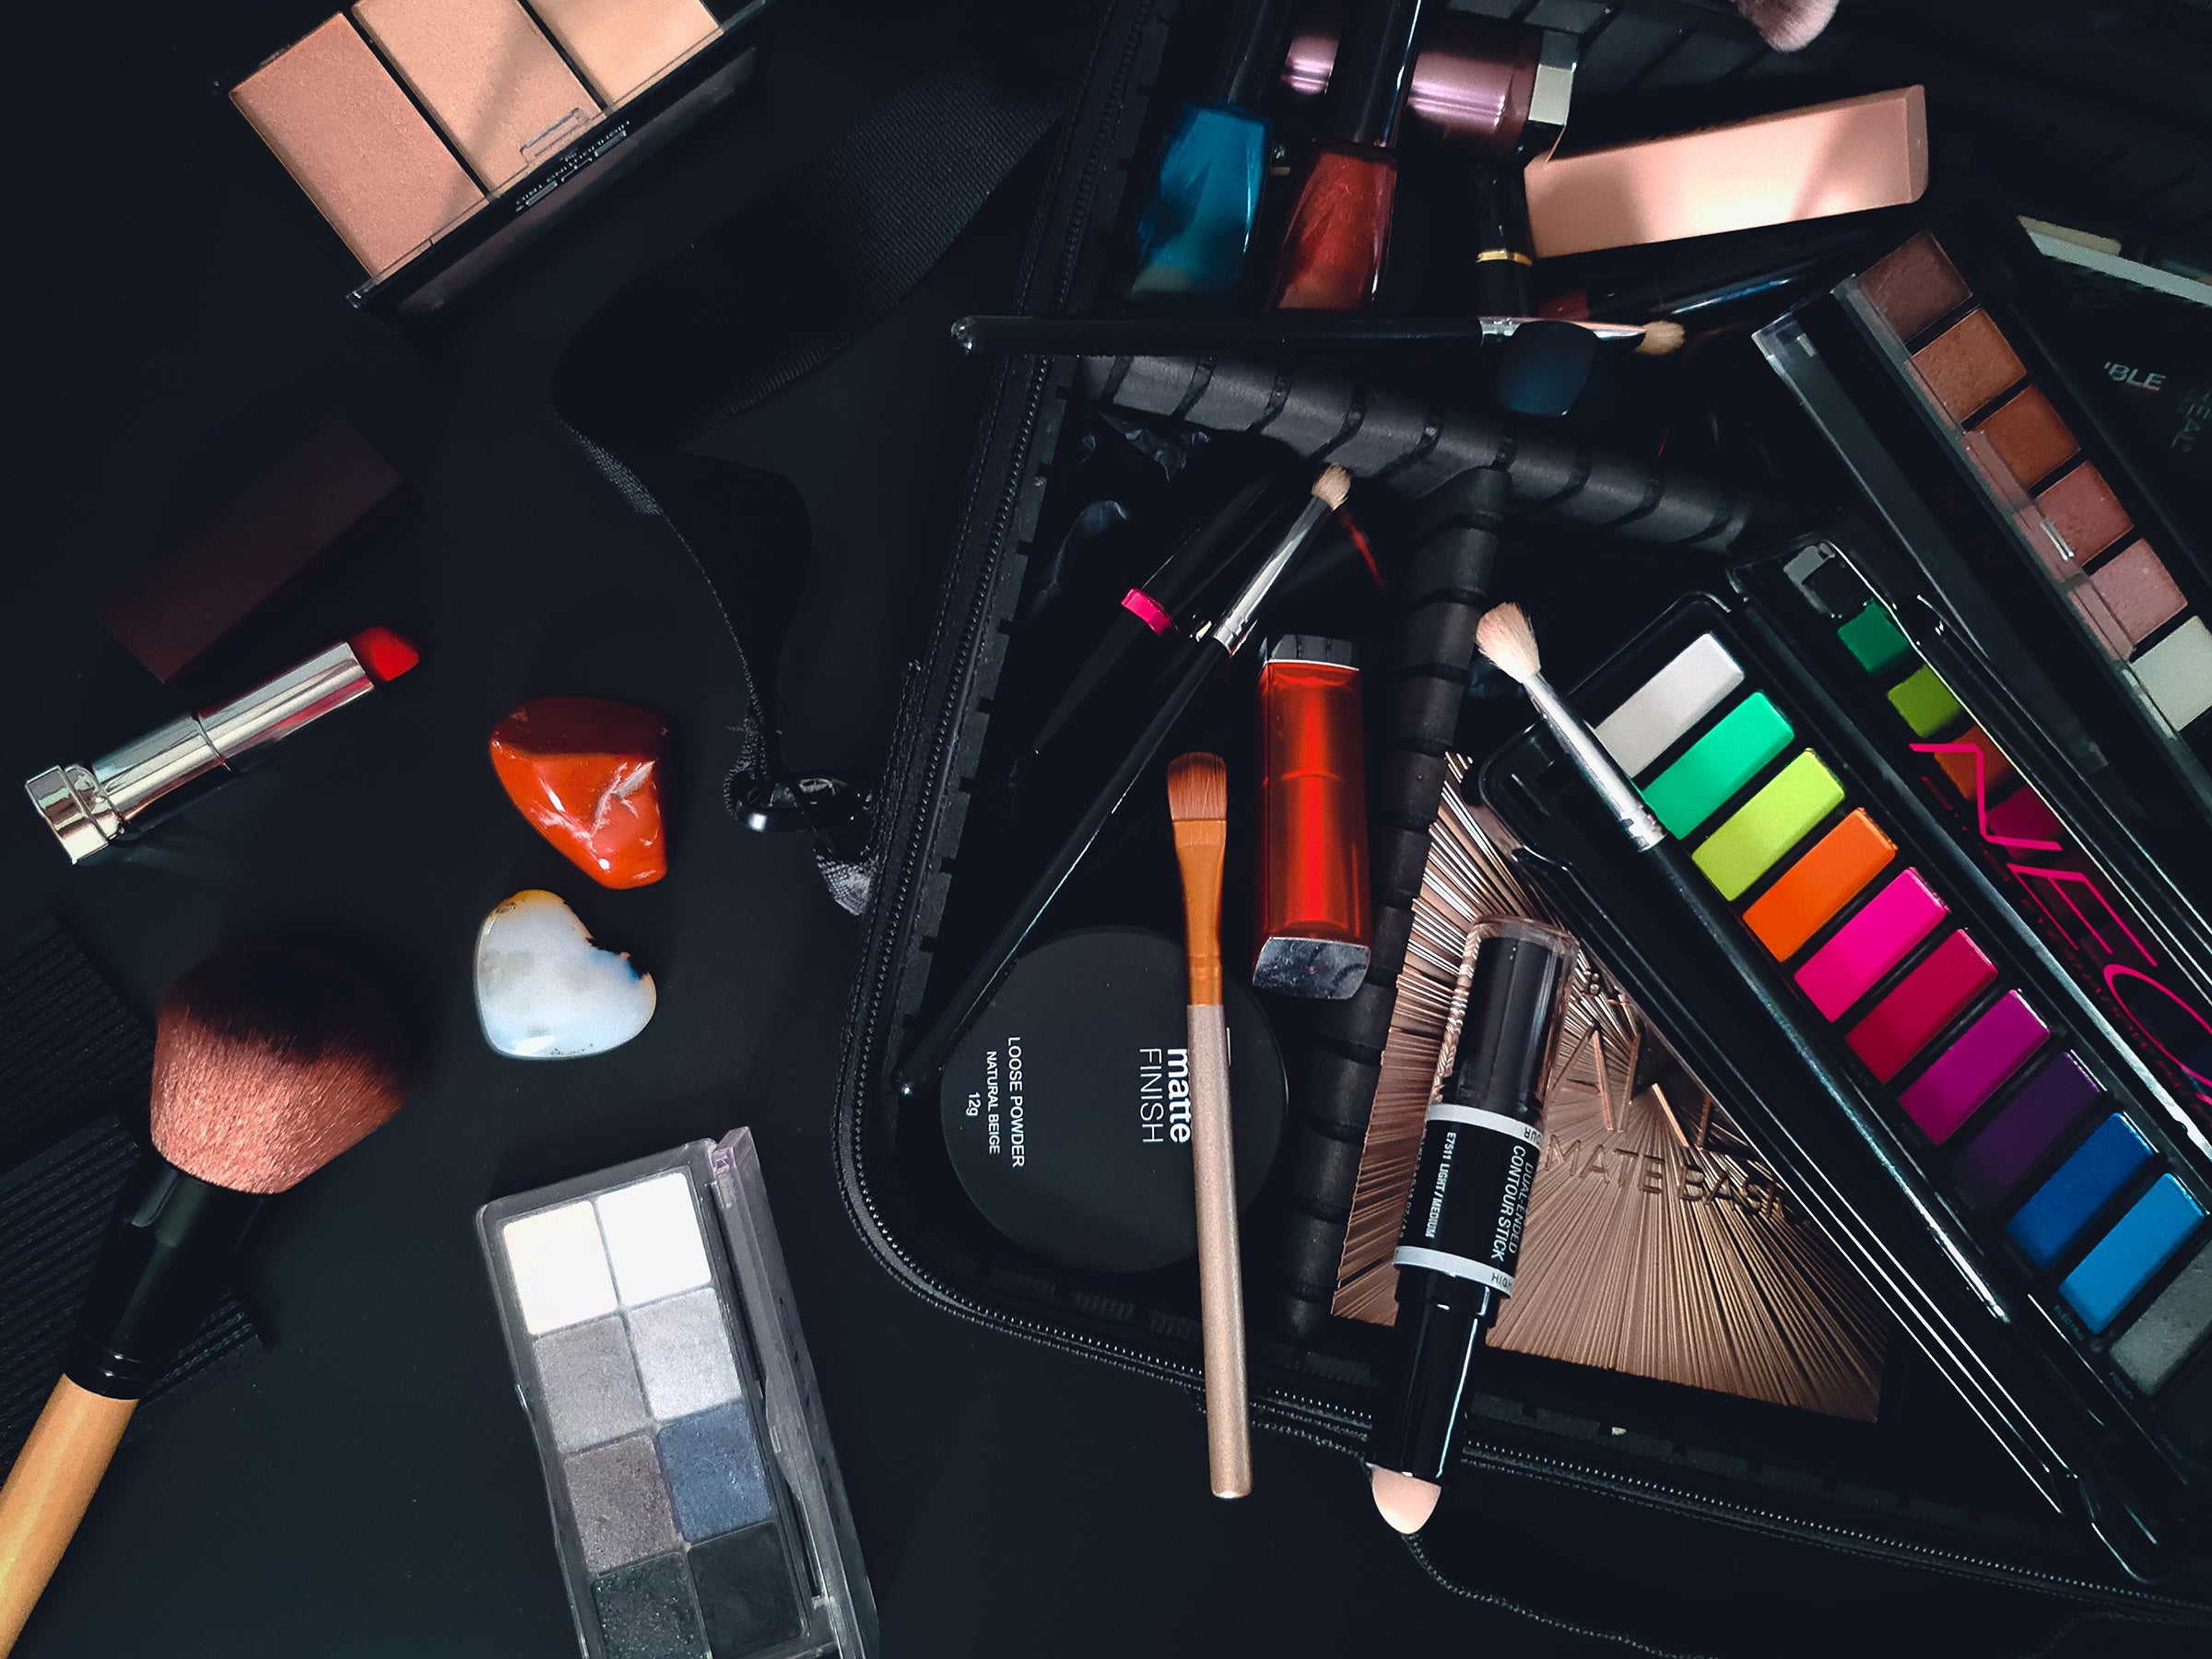 I LIKE EFFICIENT AND LONG LASTING MAKEUP PRODUCTS – HERE’S WHAT’S IN MY BAG